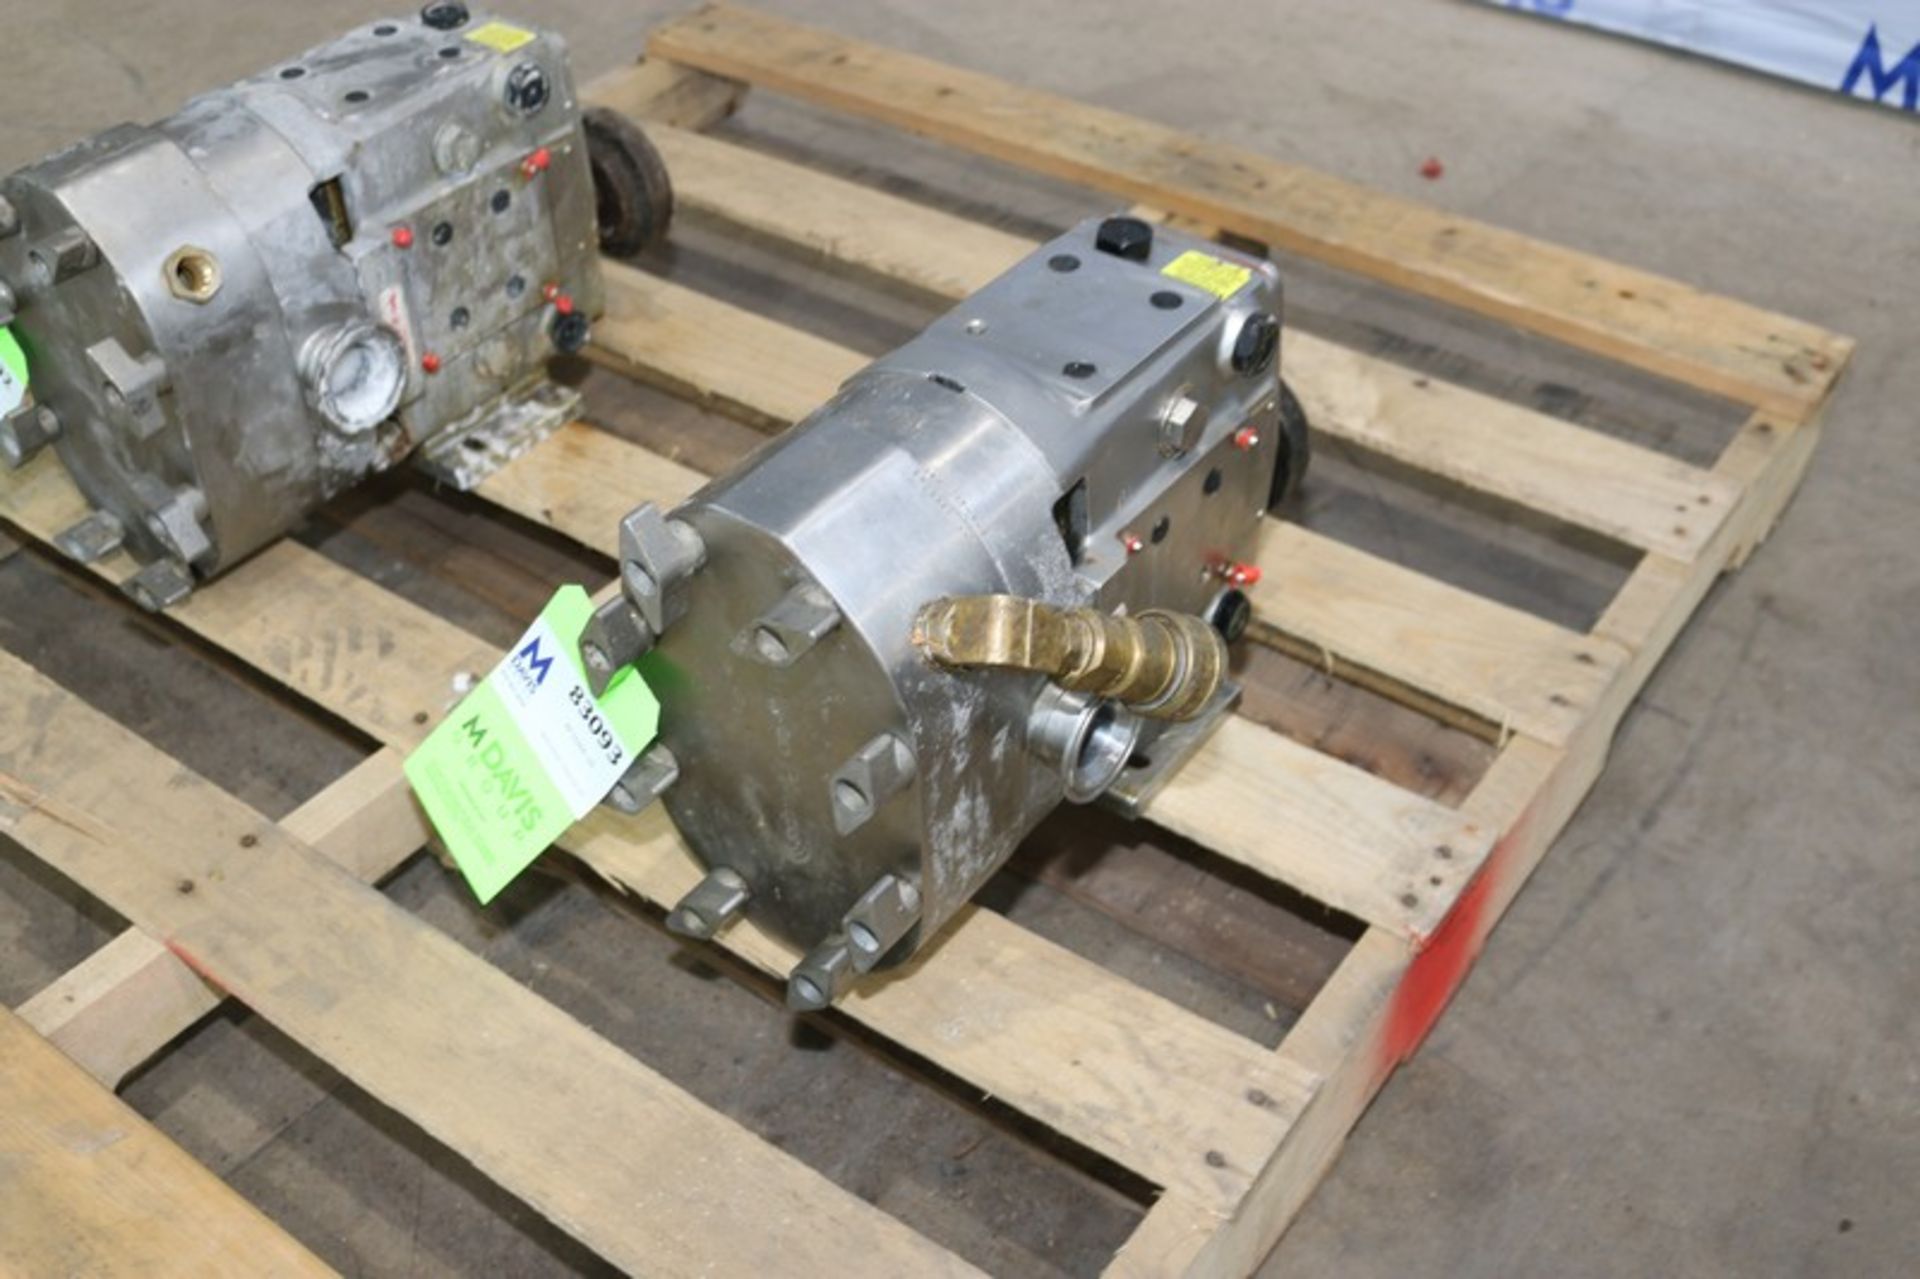 Ampco S/S Positive Displacement Pump Head, M/N ZP1+030-SO, S/N 1934541-5-1, with Aprox. 2" Clamp - Image 2 of 5